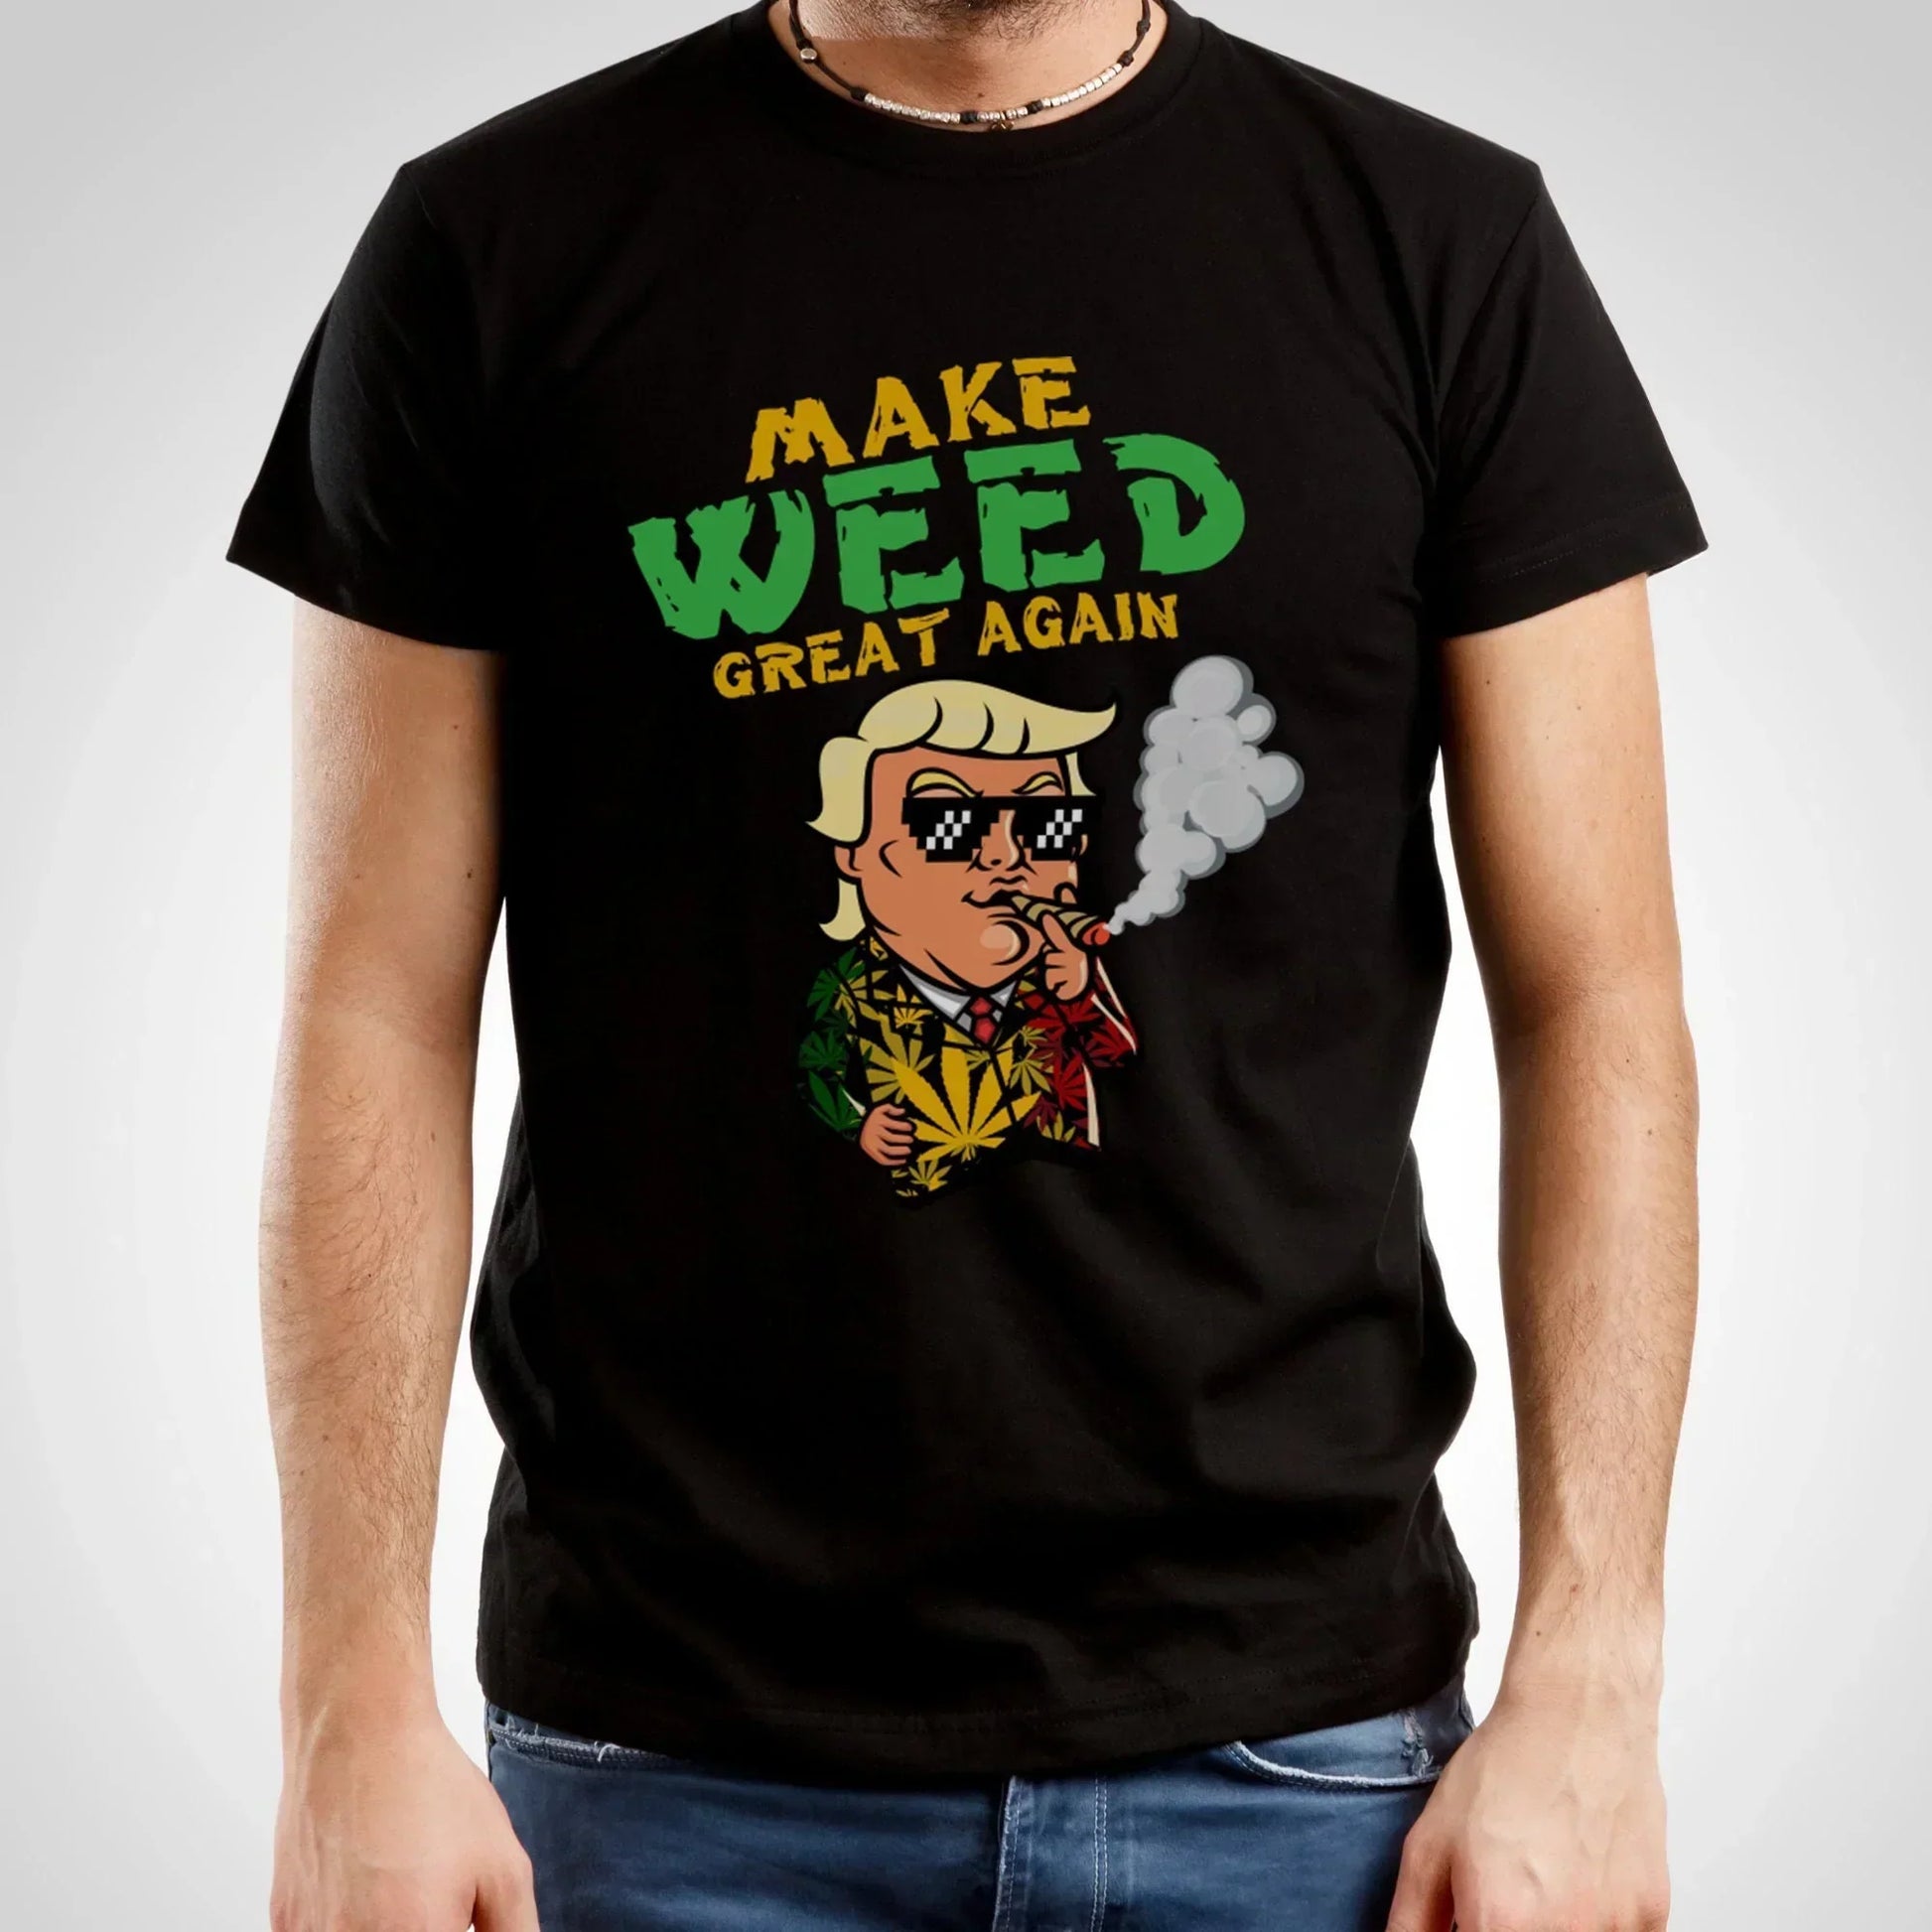 Funny Trump Shirt, Weed Gifts, Mary Jane Gorilla Smoke, Stoner Girl, Cannabis Clothes, Hippie Gift for Him, Gift for Her, Marijuana Tshirts